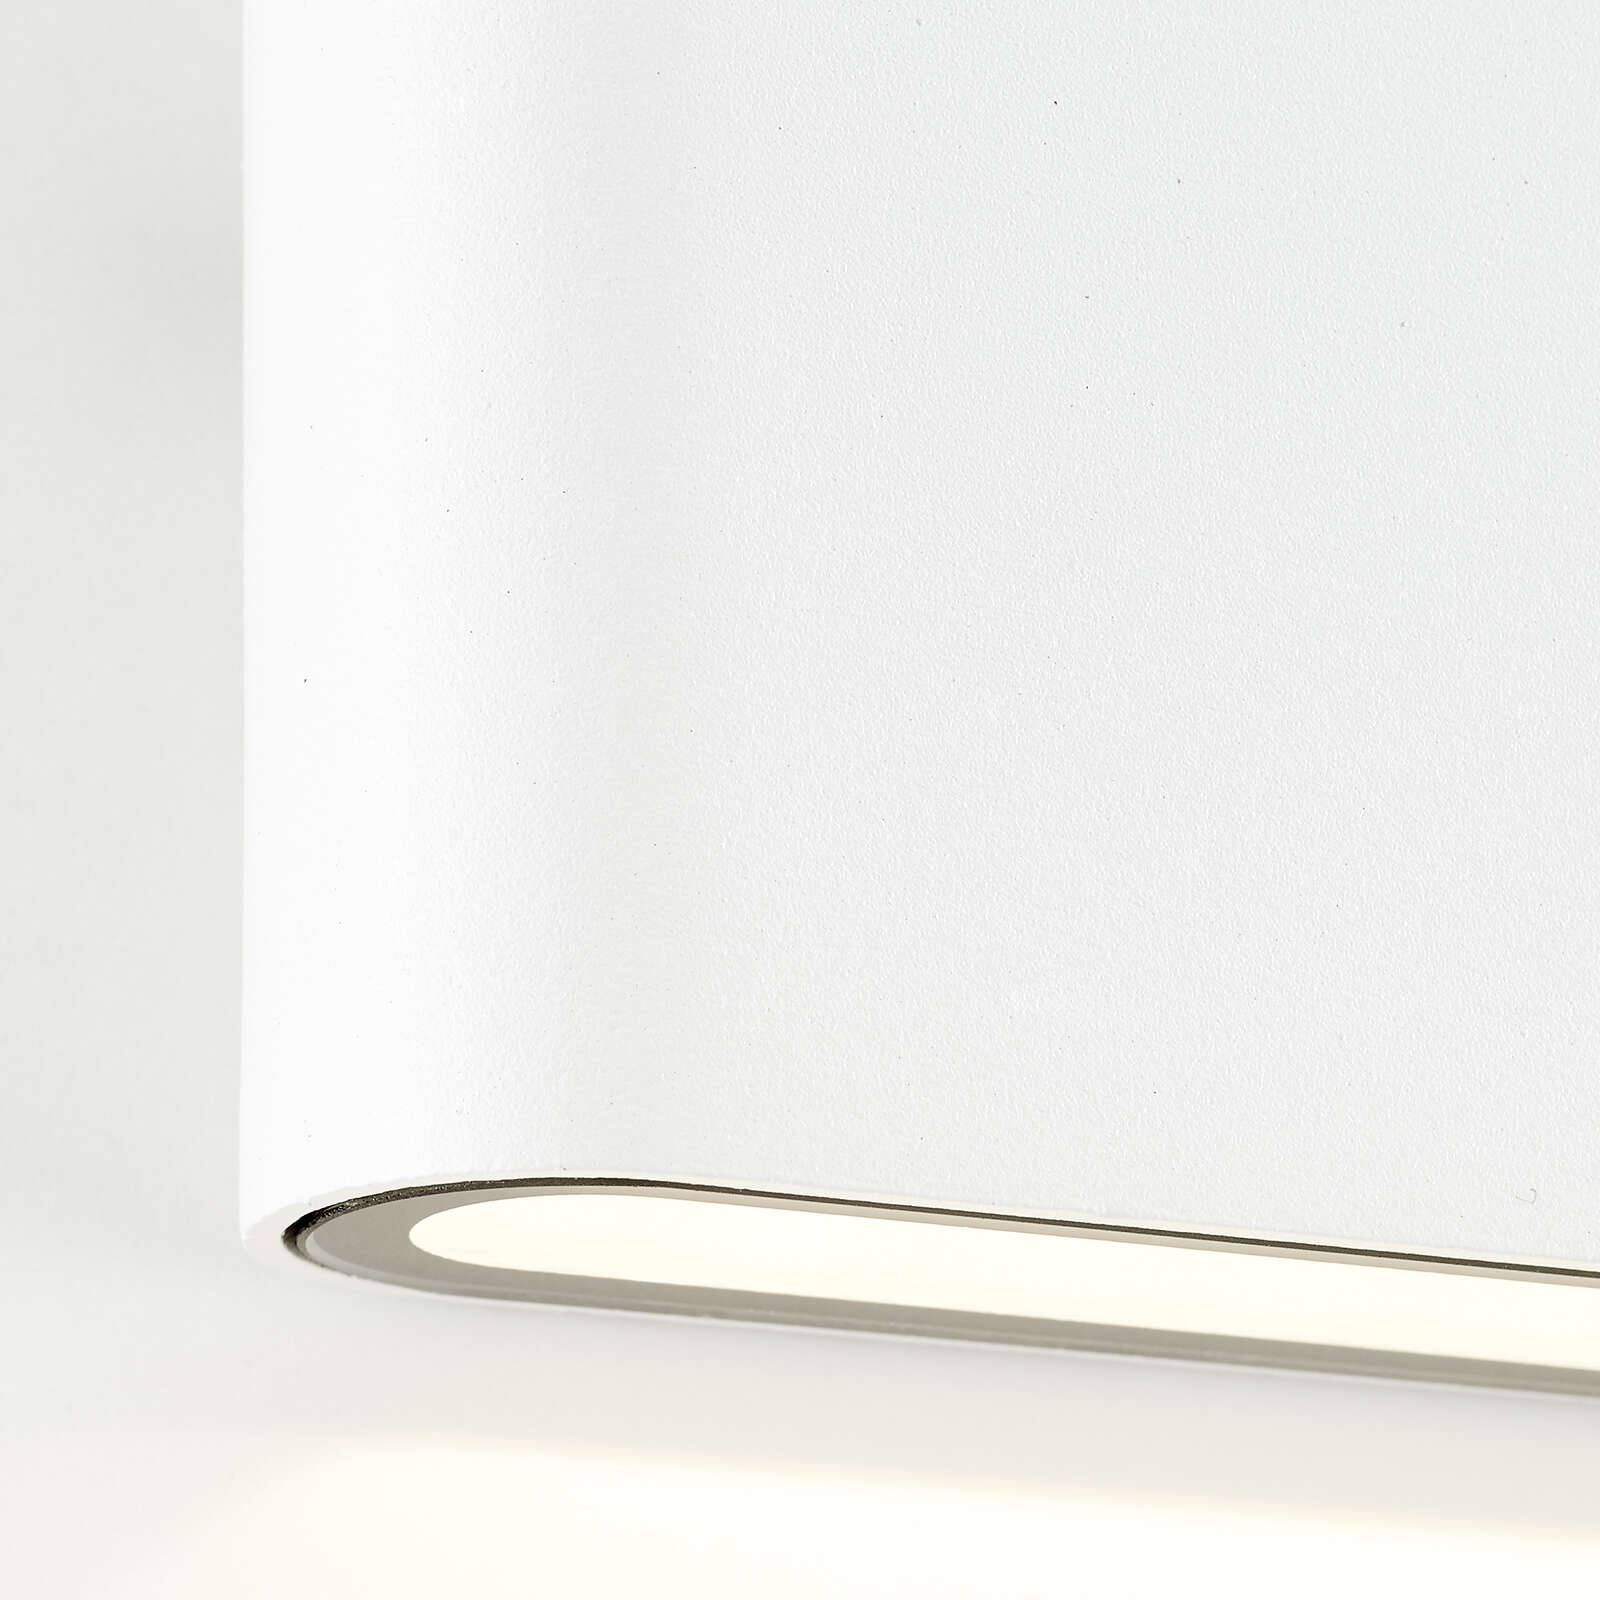             Outdoor wall light made of glass - Timo - White
        